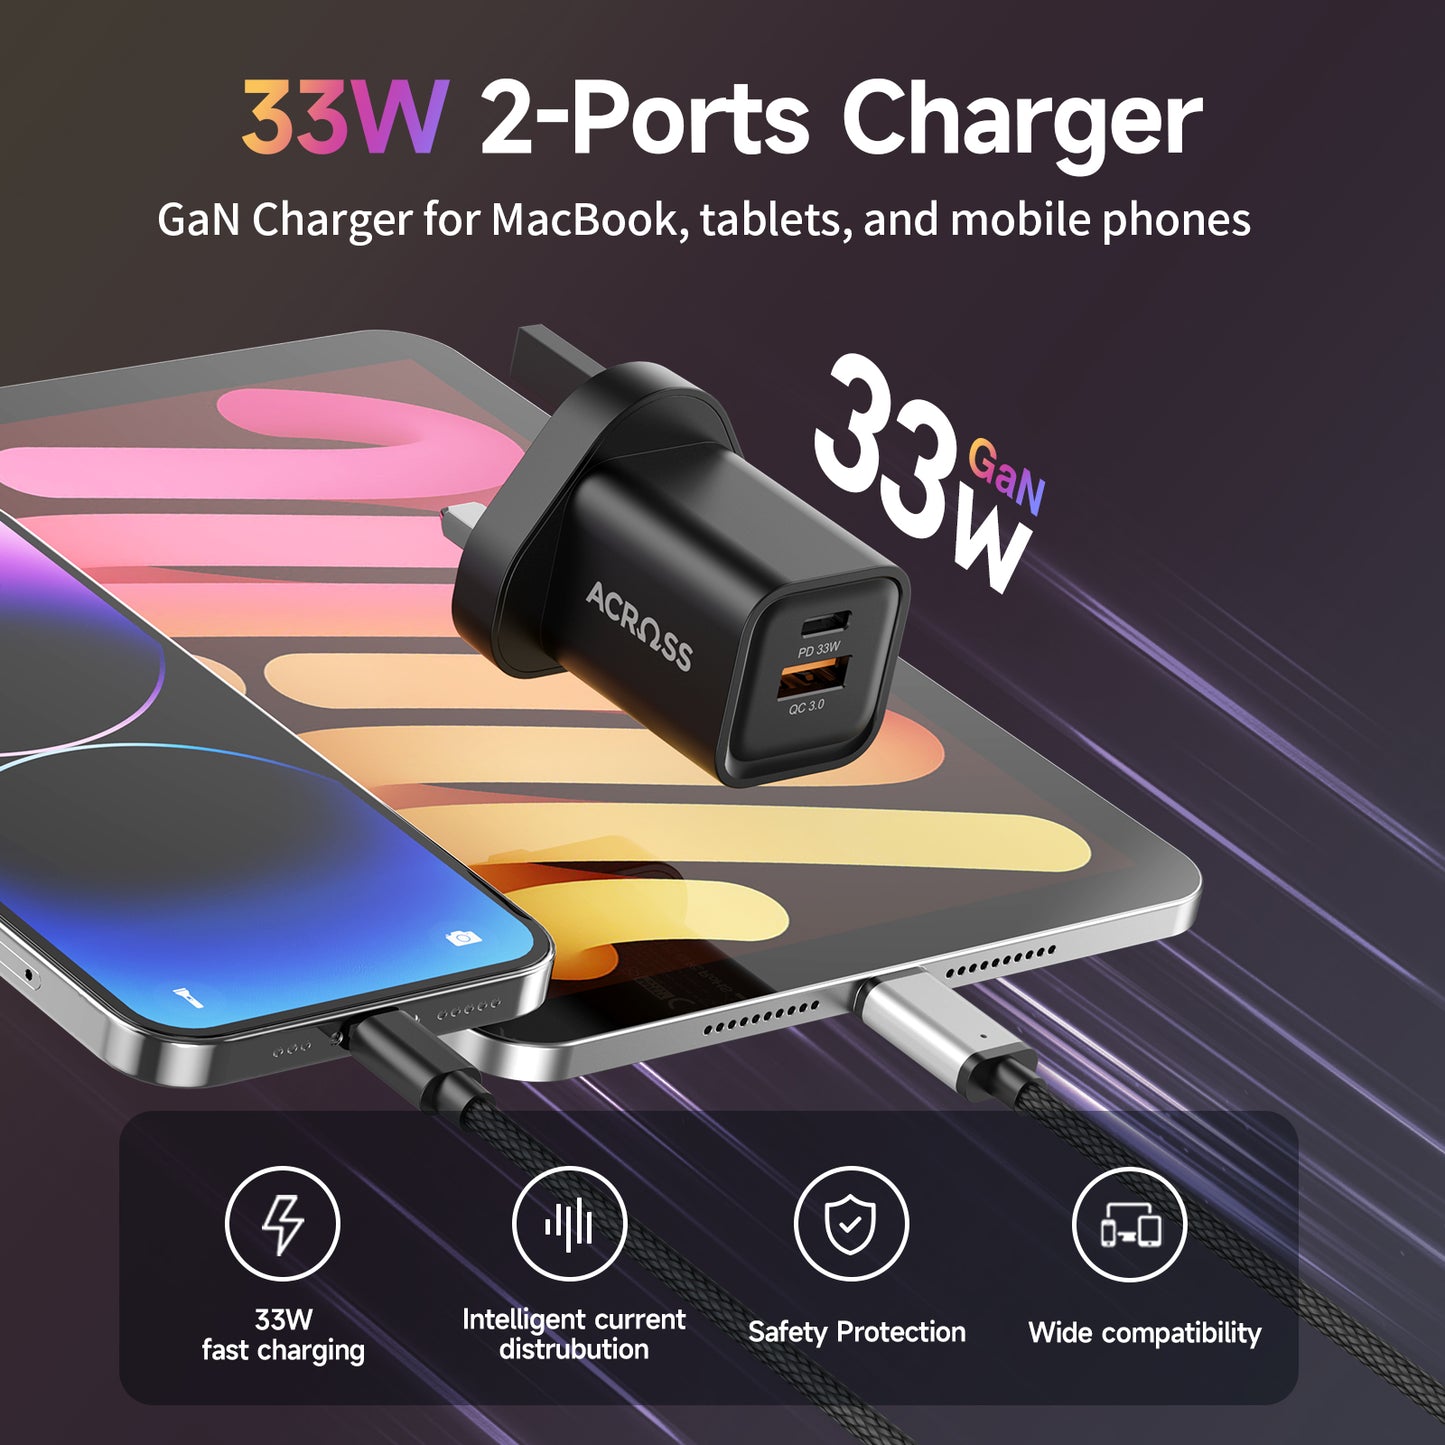 SpeedCharge 33W 2-Ports charger with PPS QC and PD 3.0 for iPhones Android Tablet Laptop Switch